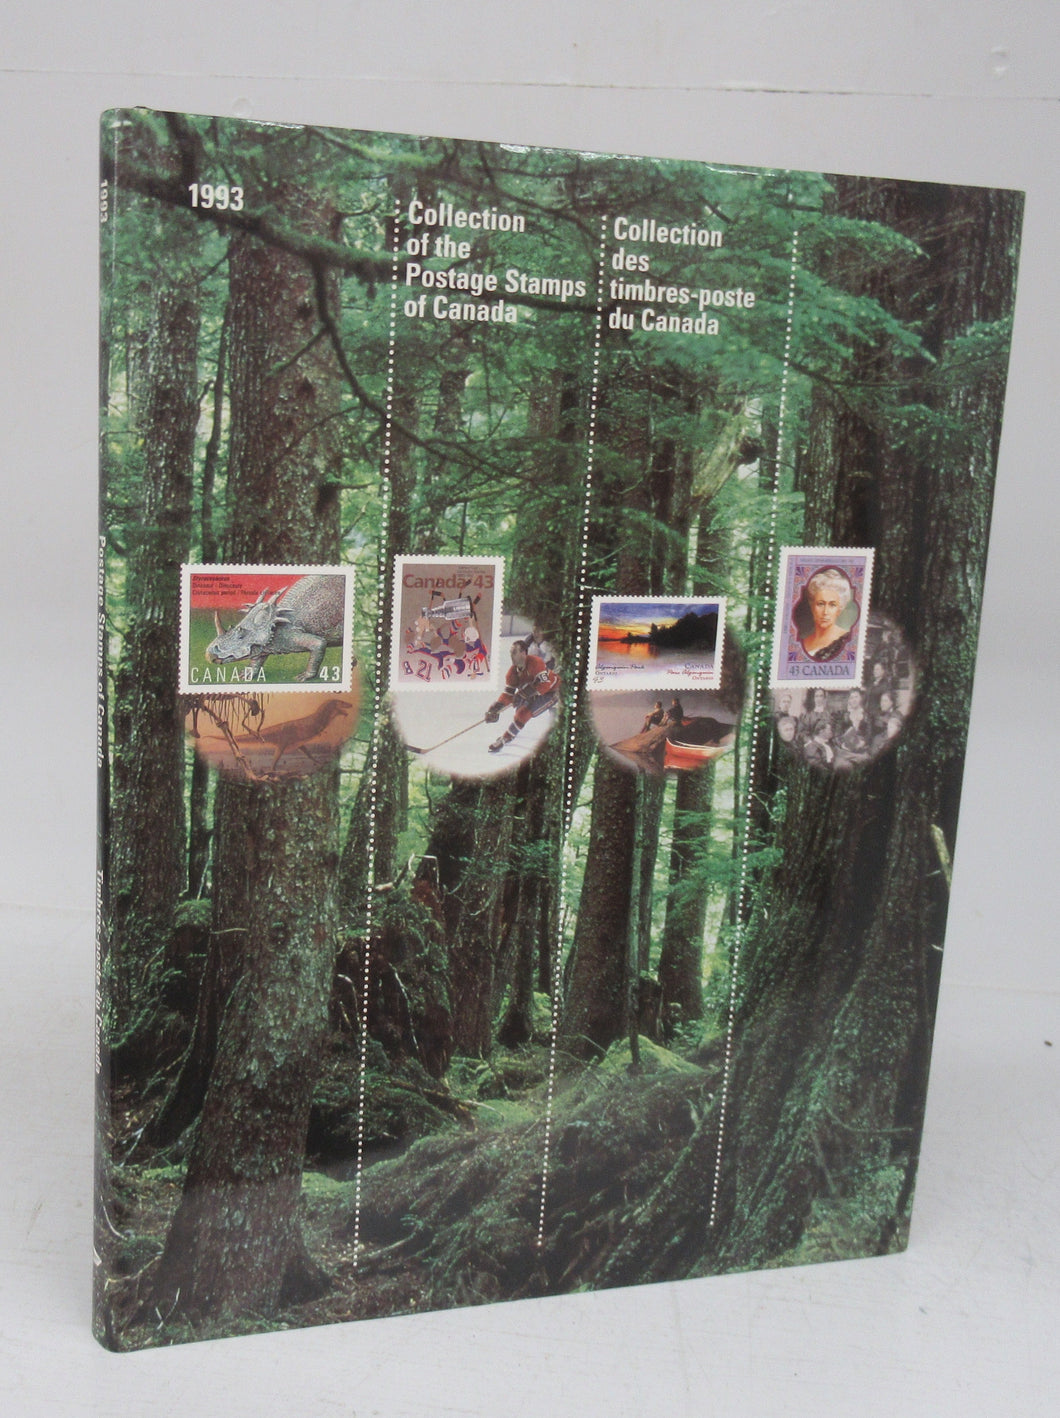 Collection of the Postage Stamps of Canada 1993/Collection des Timbres-poste du Canada 1993